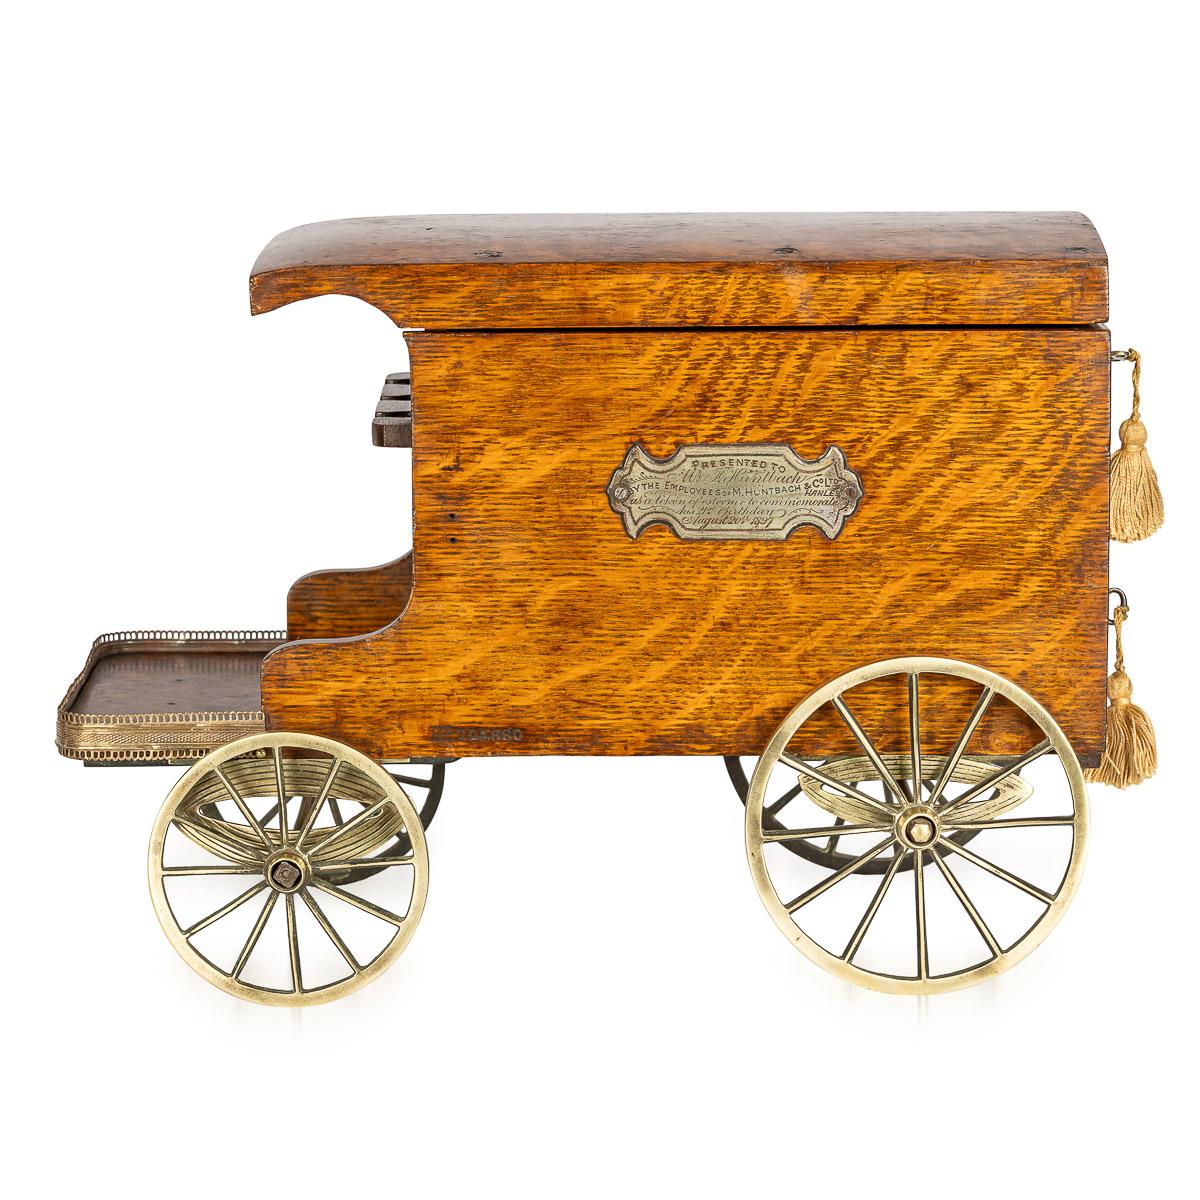 Antique late 19th Century Victorian oak smoker's companion ingeniously fashioned in the style of a horse-drawn delivery van. This splendid piece features a hinged lid that gracefully conceals two compartments for storing tobacco, showcasing a